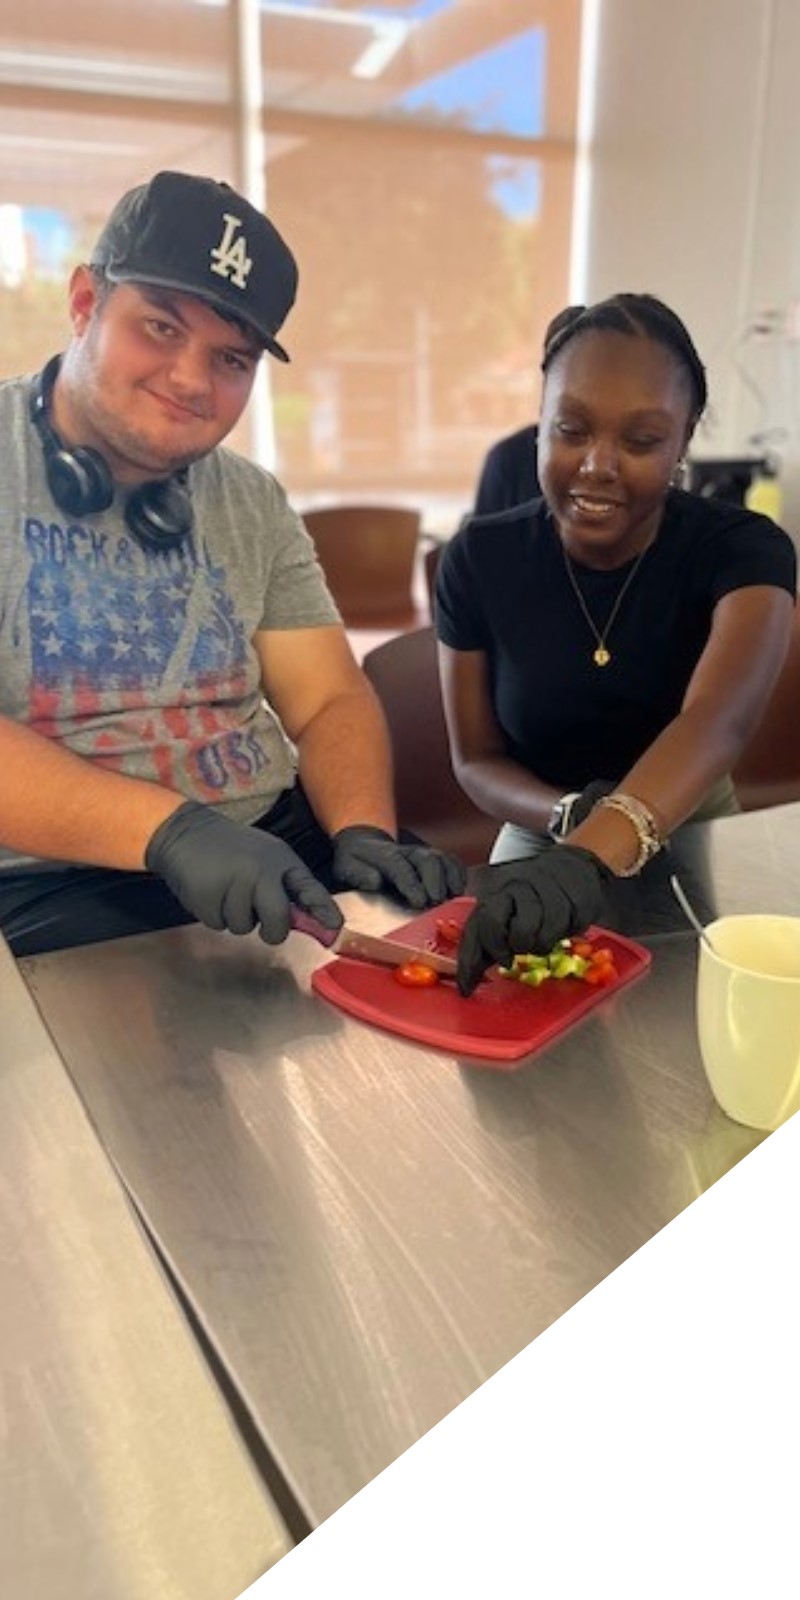 Think Beach students participated in life-skills workshops including a cooking class this year. Pictured are mentee Steven Perez and mentor Ashley Harris.